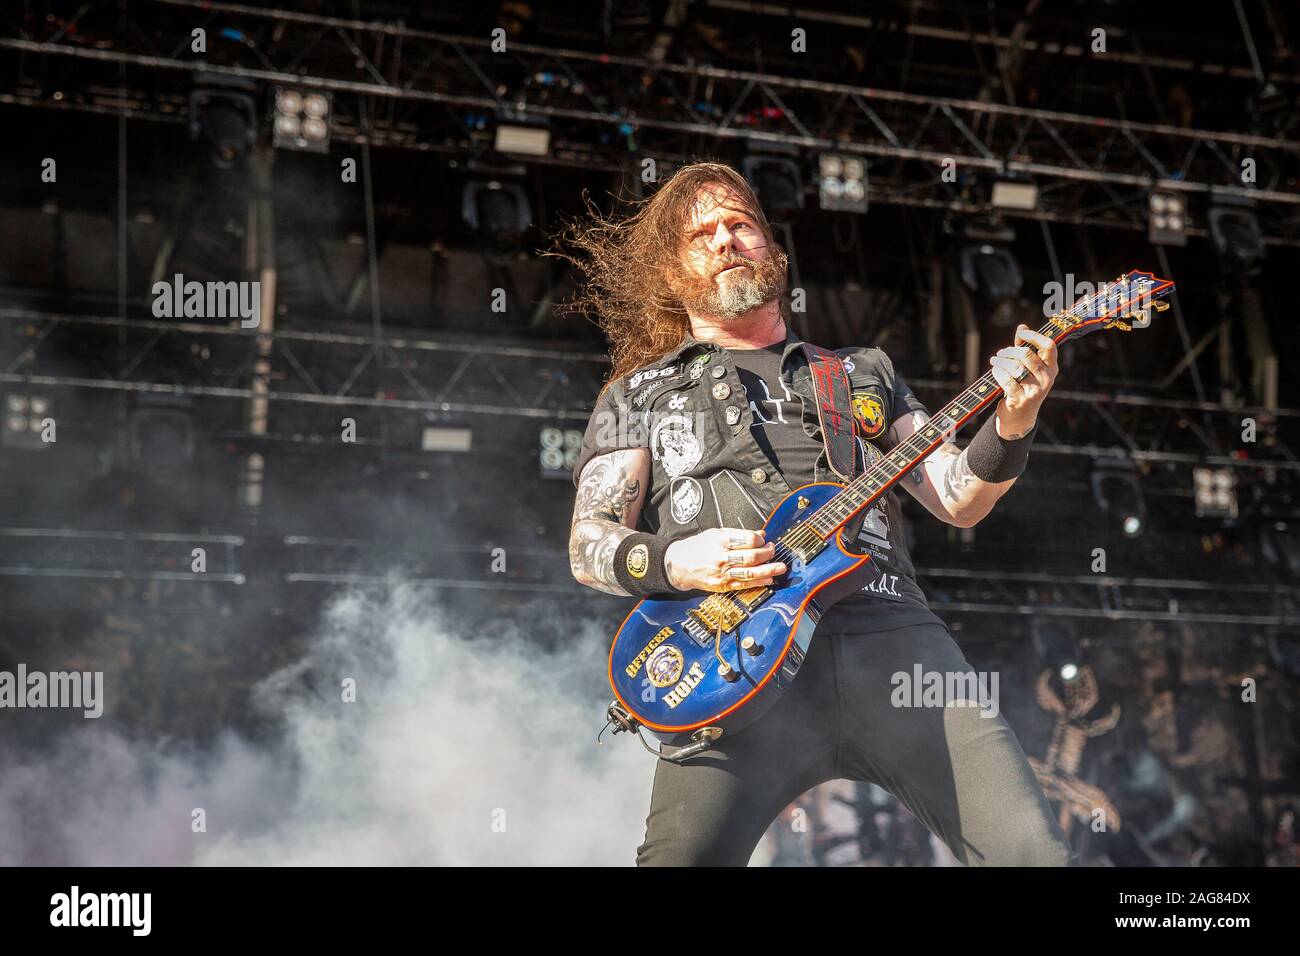 Oslo, Norway. 28th, June 2019. The American thrash metal band Slayer  performs a live concert during the Norwegian music festival Tons of Rock  2019. Here guitarist Gary Holt is seen live on